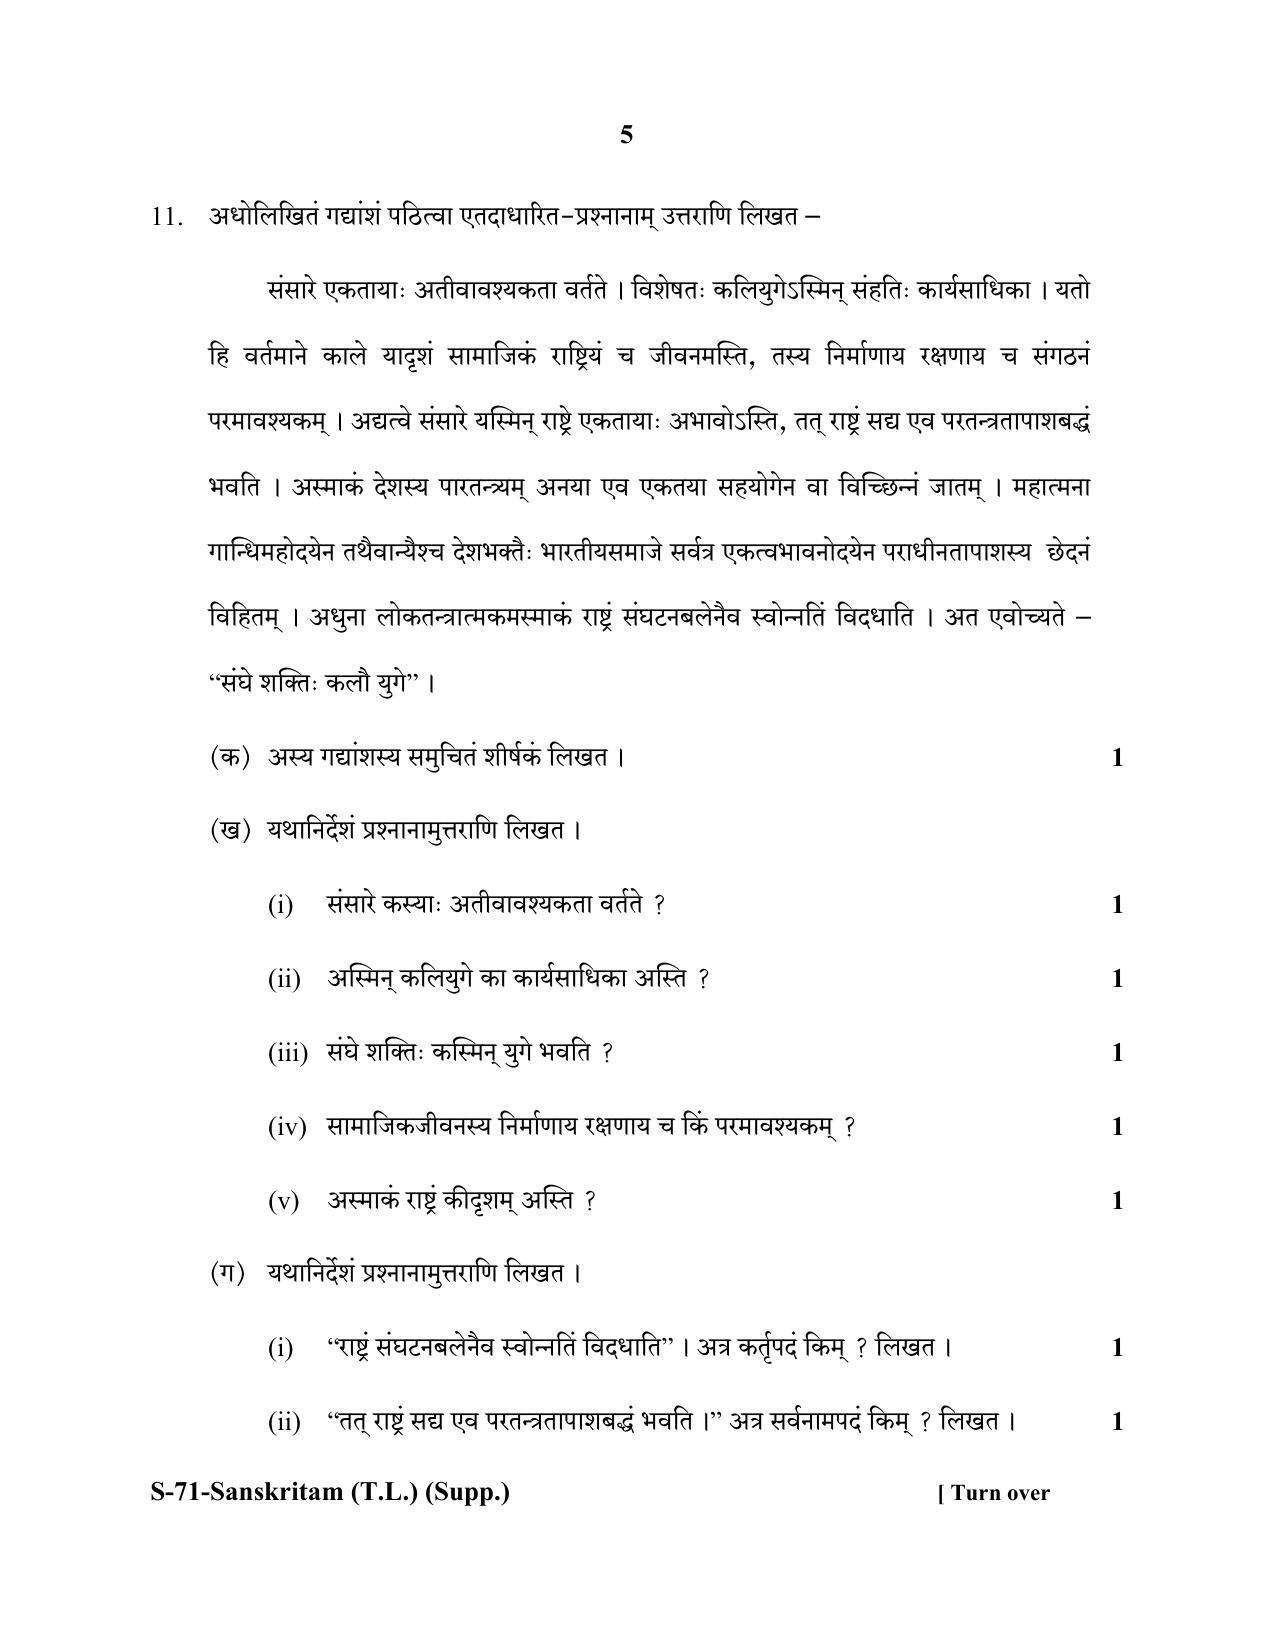 RBSE Class 10 Sanskrit TL Supplementary 2020 Question Paper - Page 5